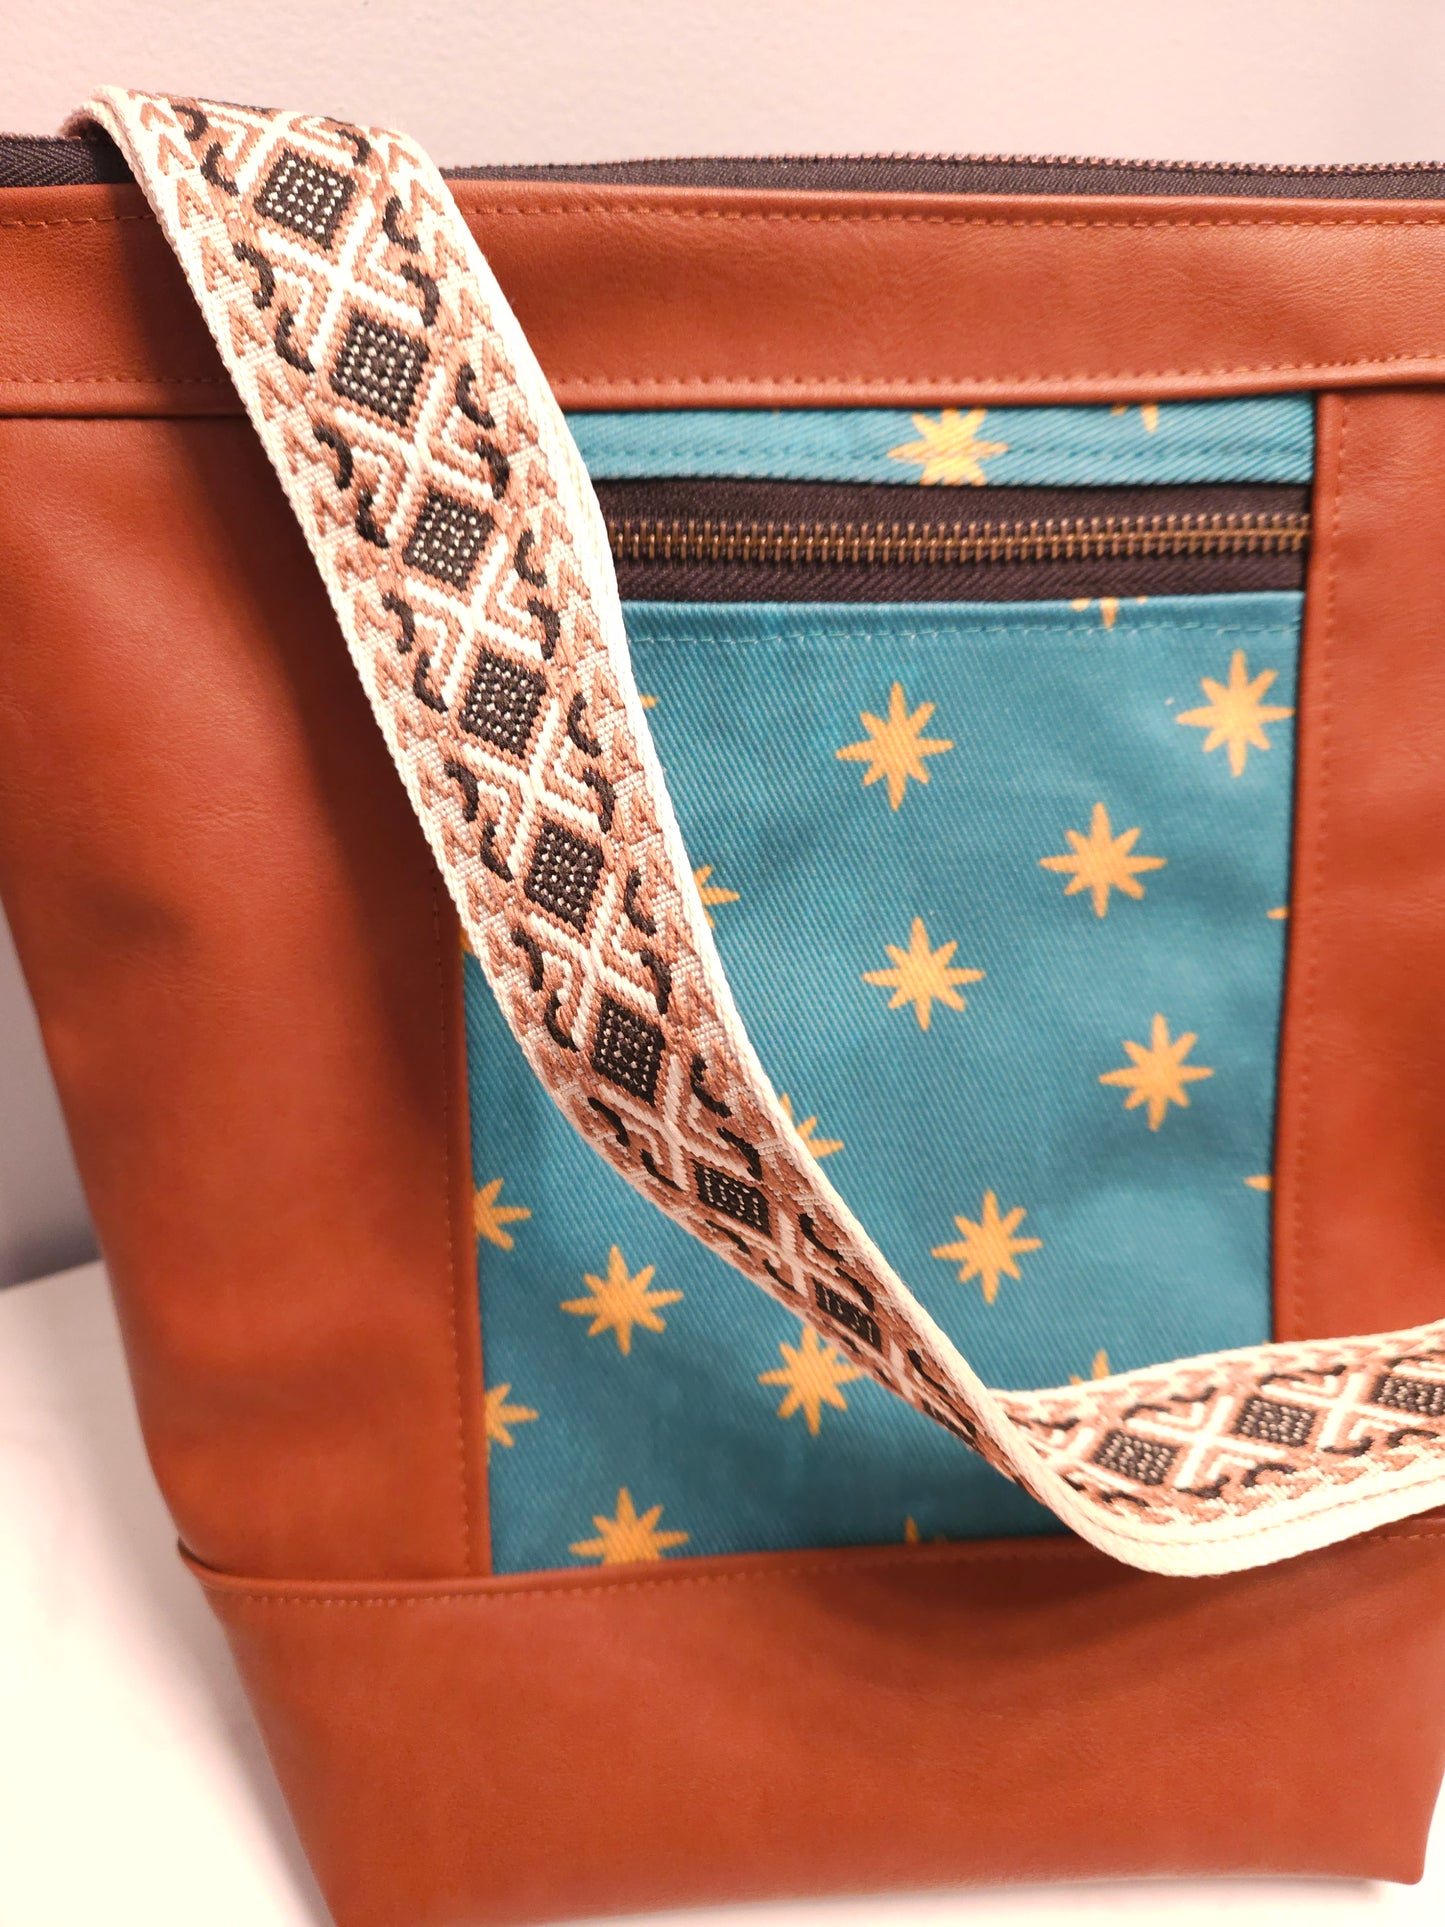 Faux leather Our Lady of Guadalupe Crossbody with pockets